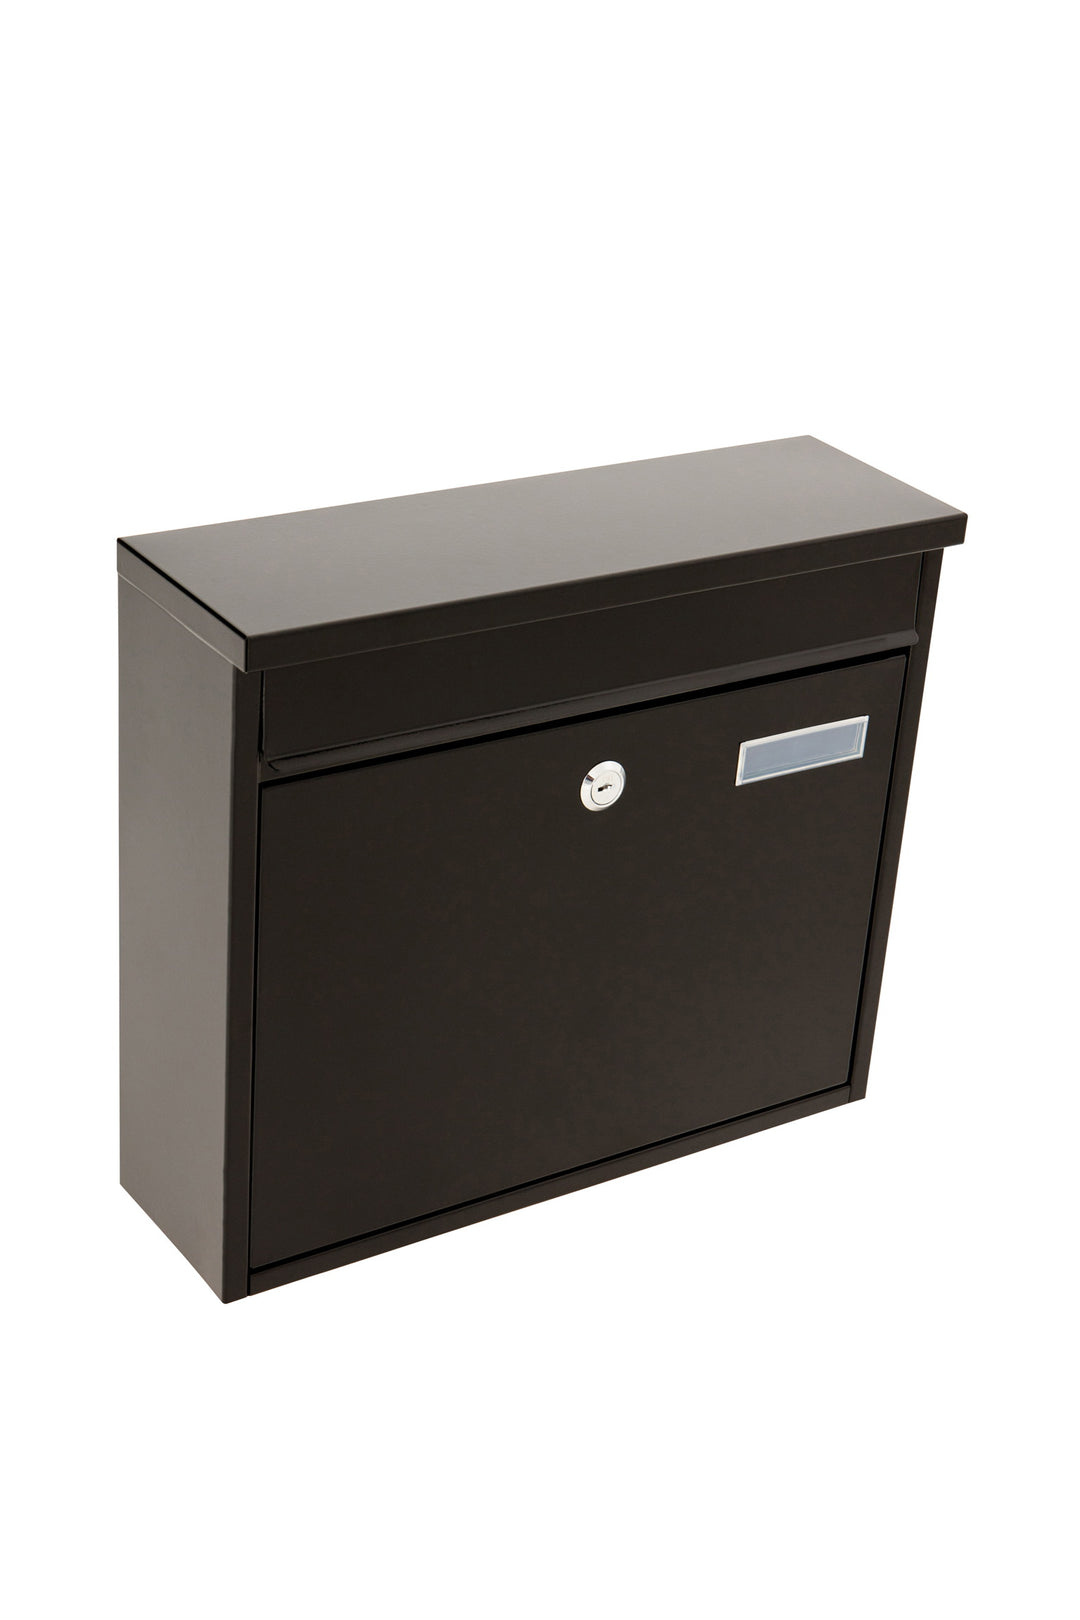 Barrow letterbox black front loading